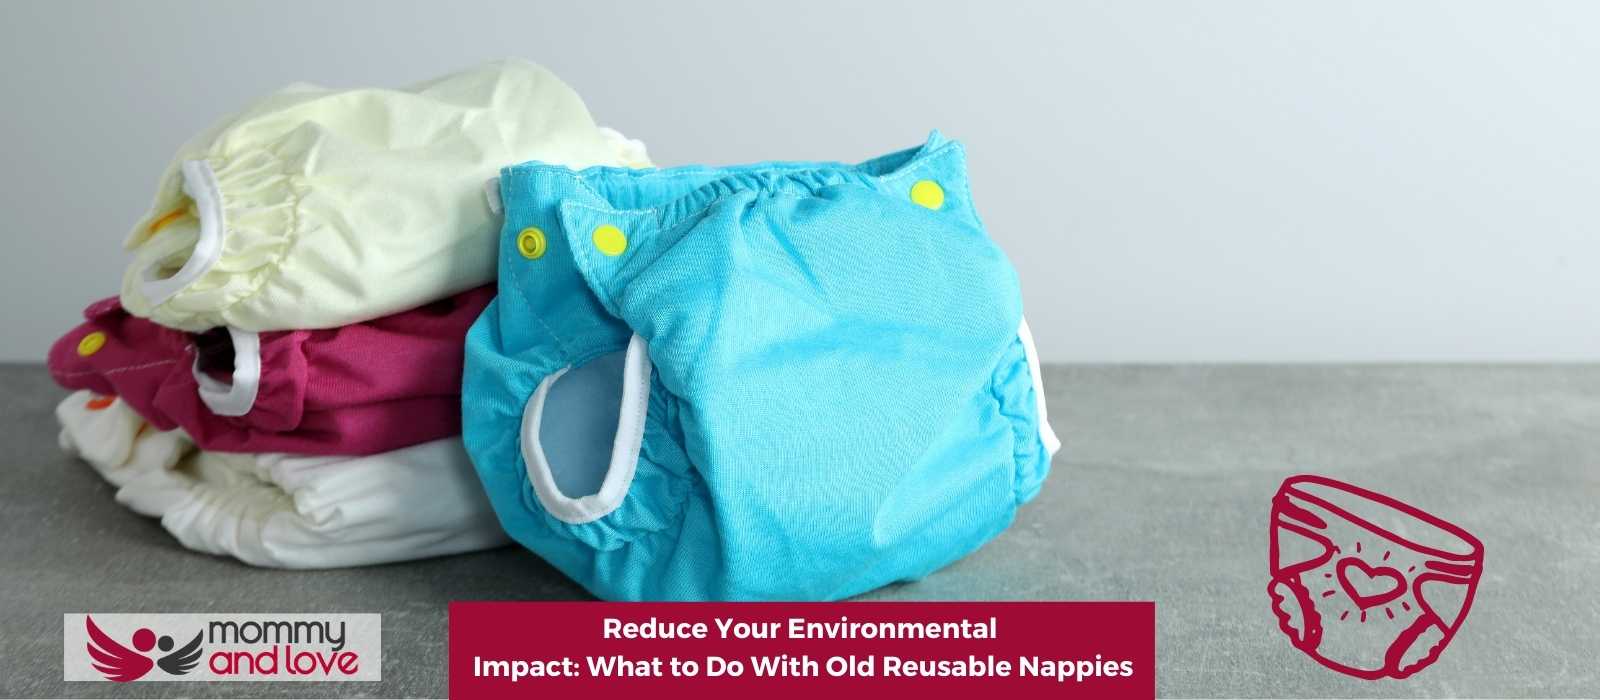 Reduce Your Environmental Impact What to Do With Old Reusable Nappies